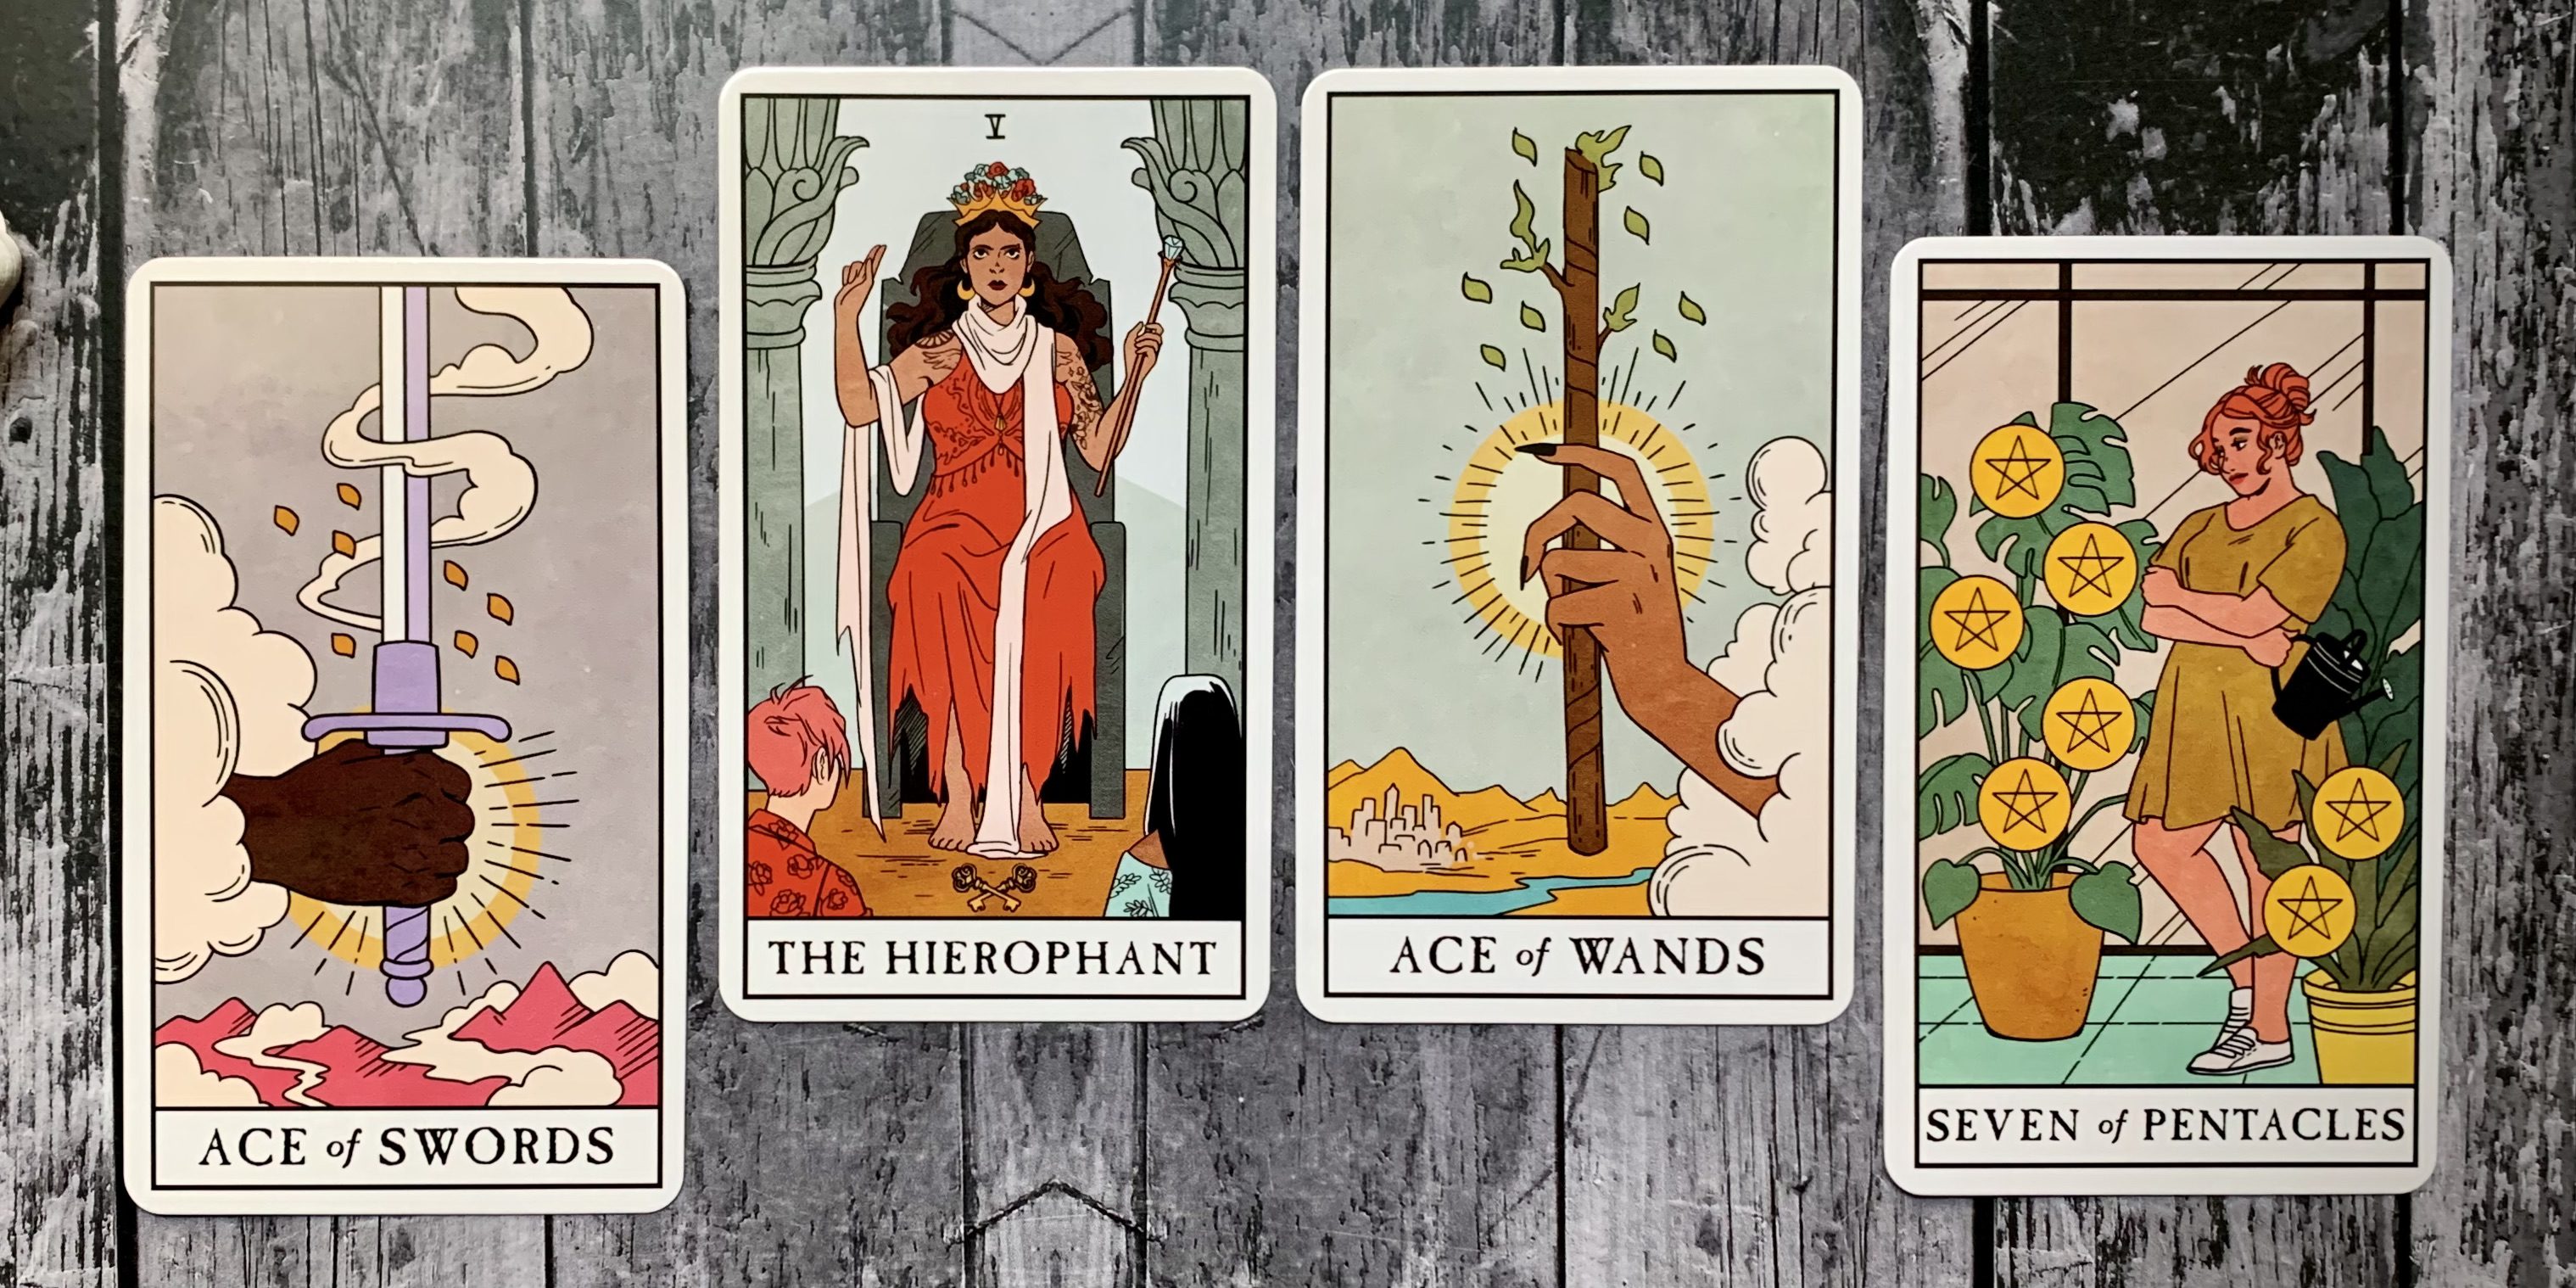 A spread of four tarot cards - the Ace of Swords, the Hierophant, Ace of Wands, and Seven of Pentacles - spread out against a wooden background